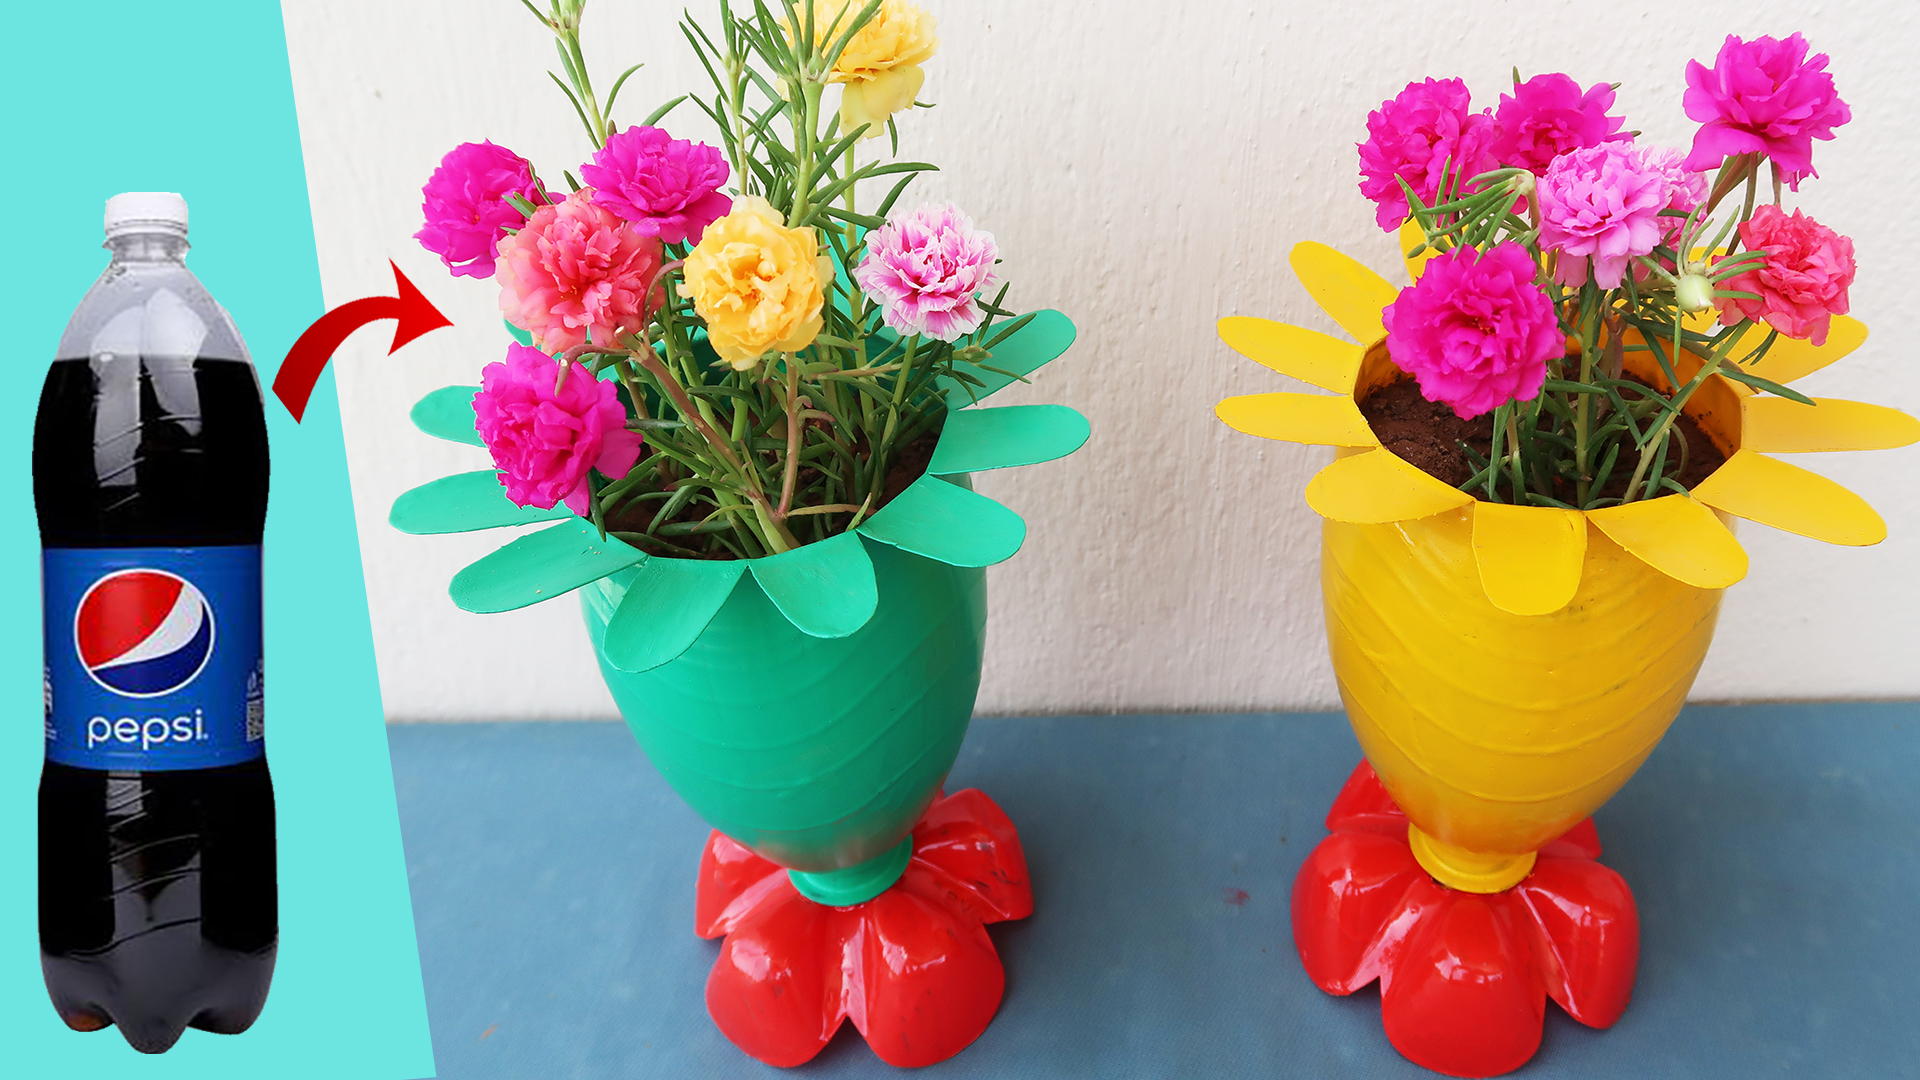 Great With Flower-Shaped Flower Pots Made From Recycled Plastic Bottles